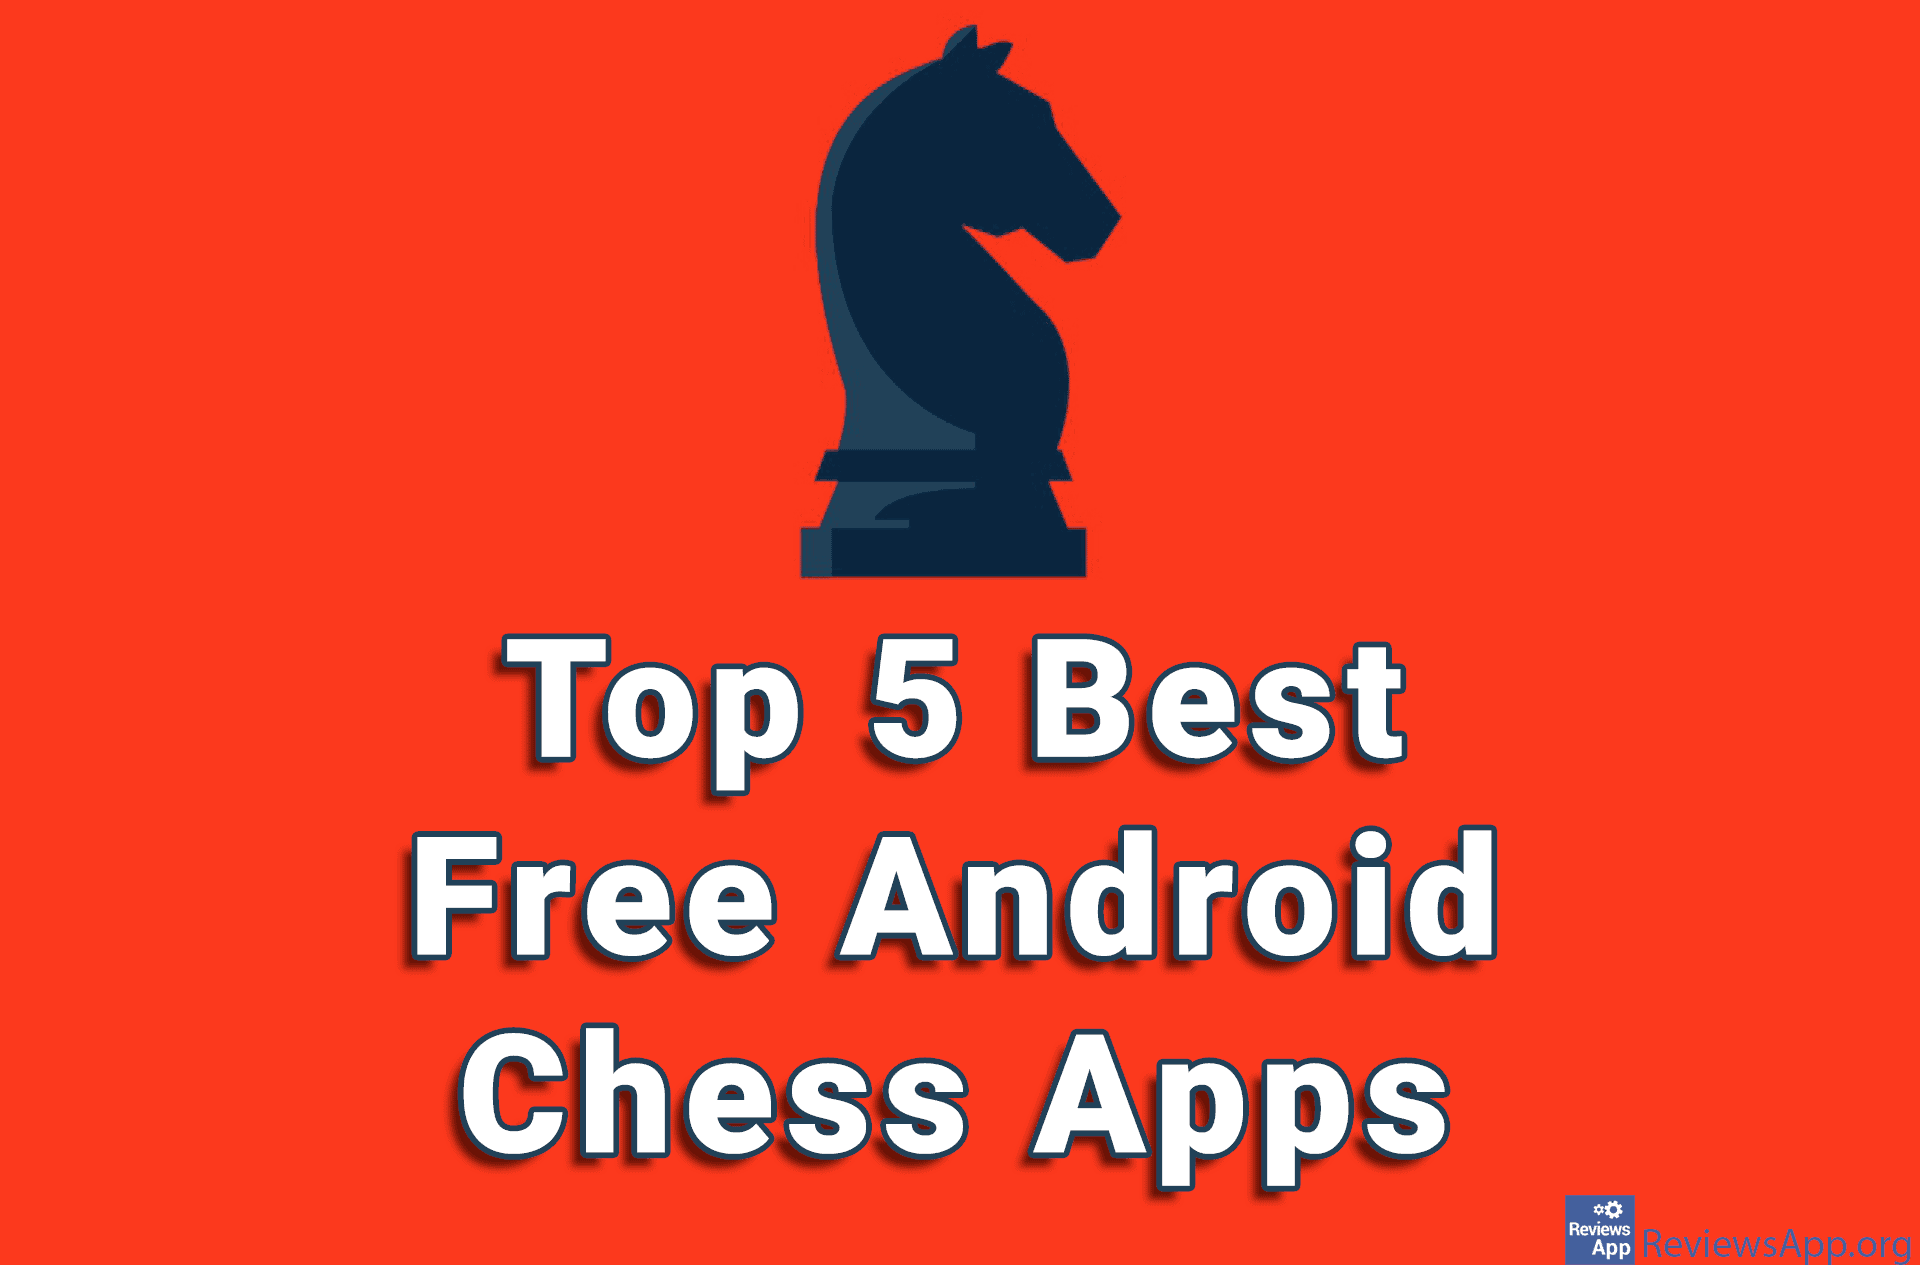 Top 5 Best Free Android Chess Apps